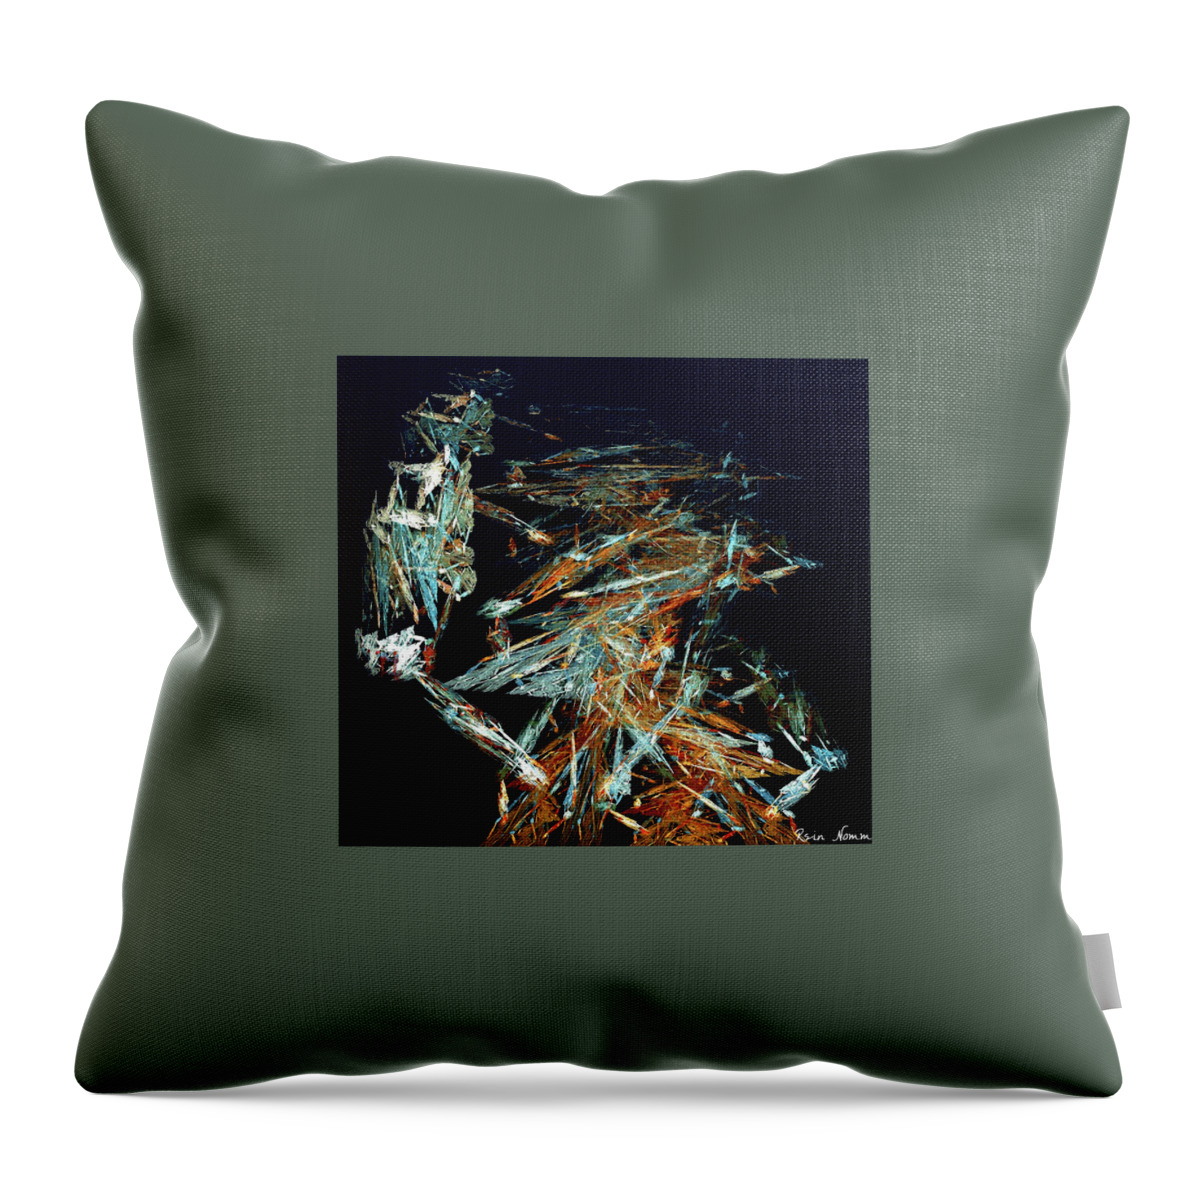  Throw Pillow featuring the digital art Off the Tracks by Rein Nomm